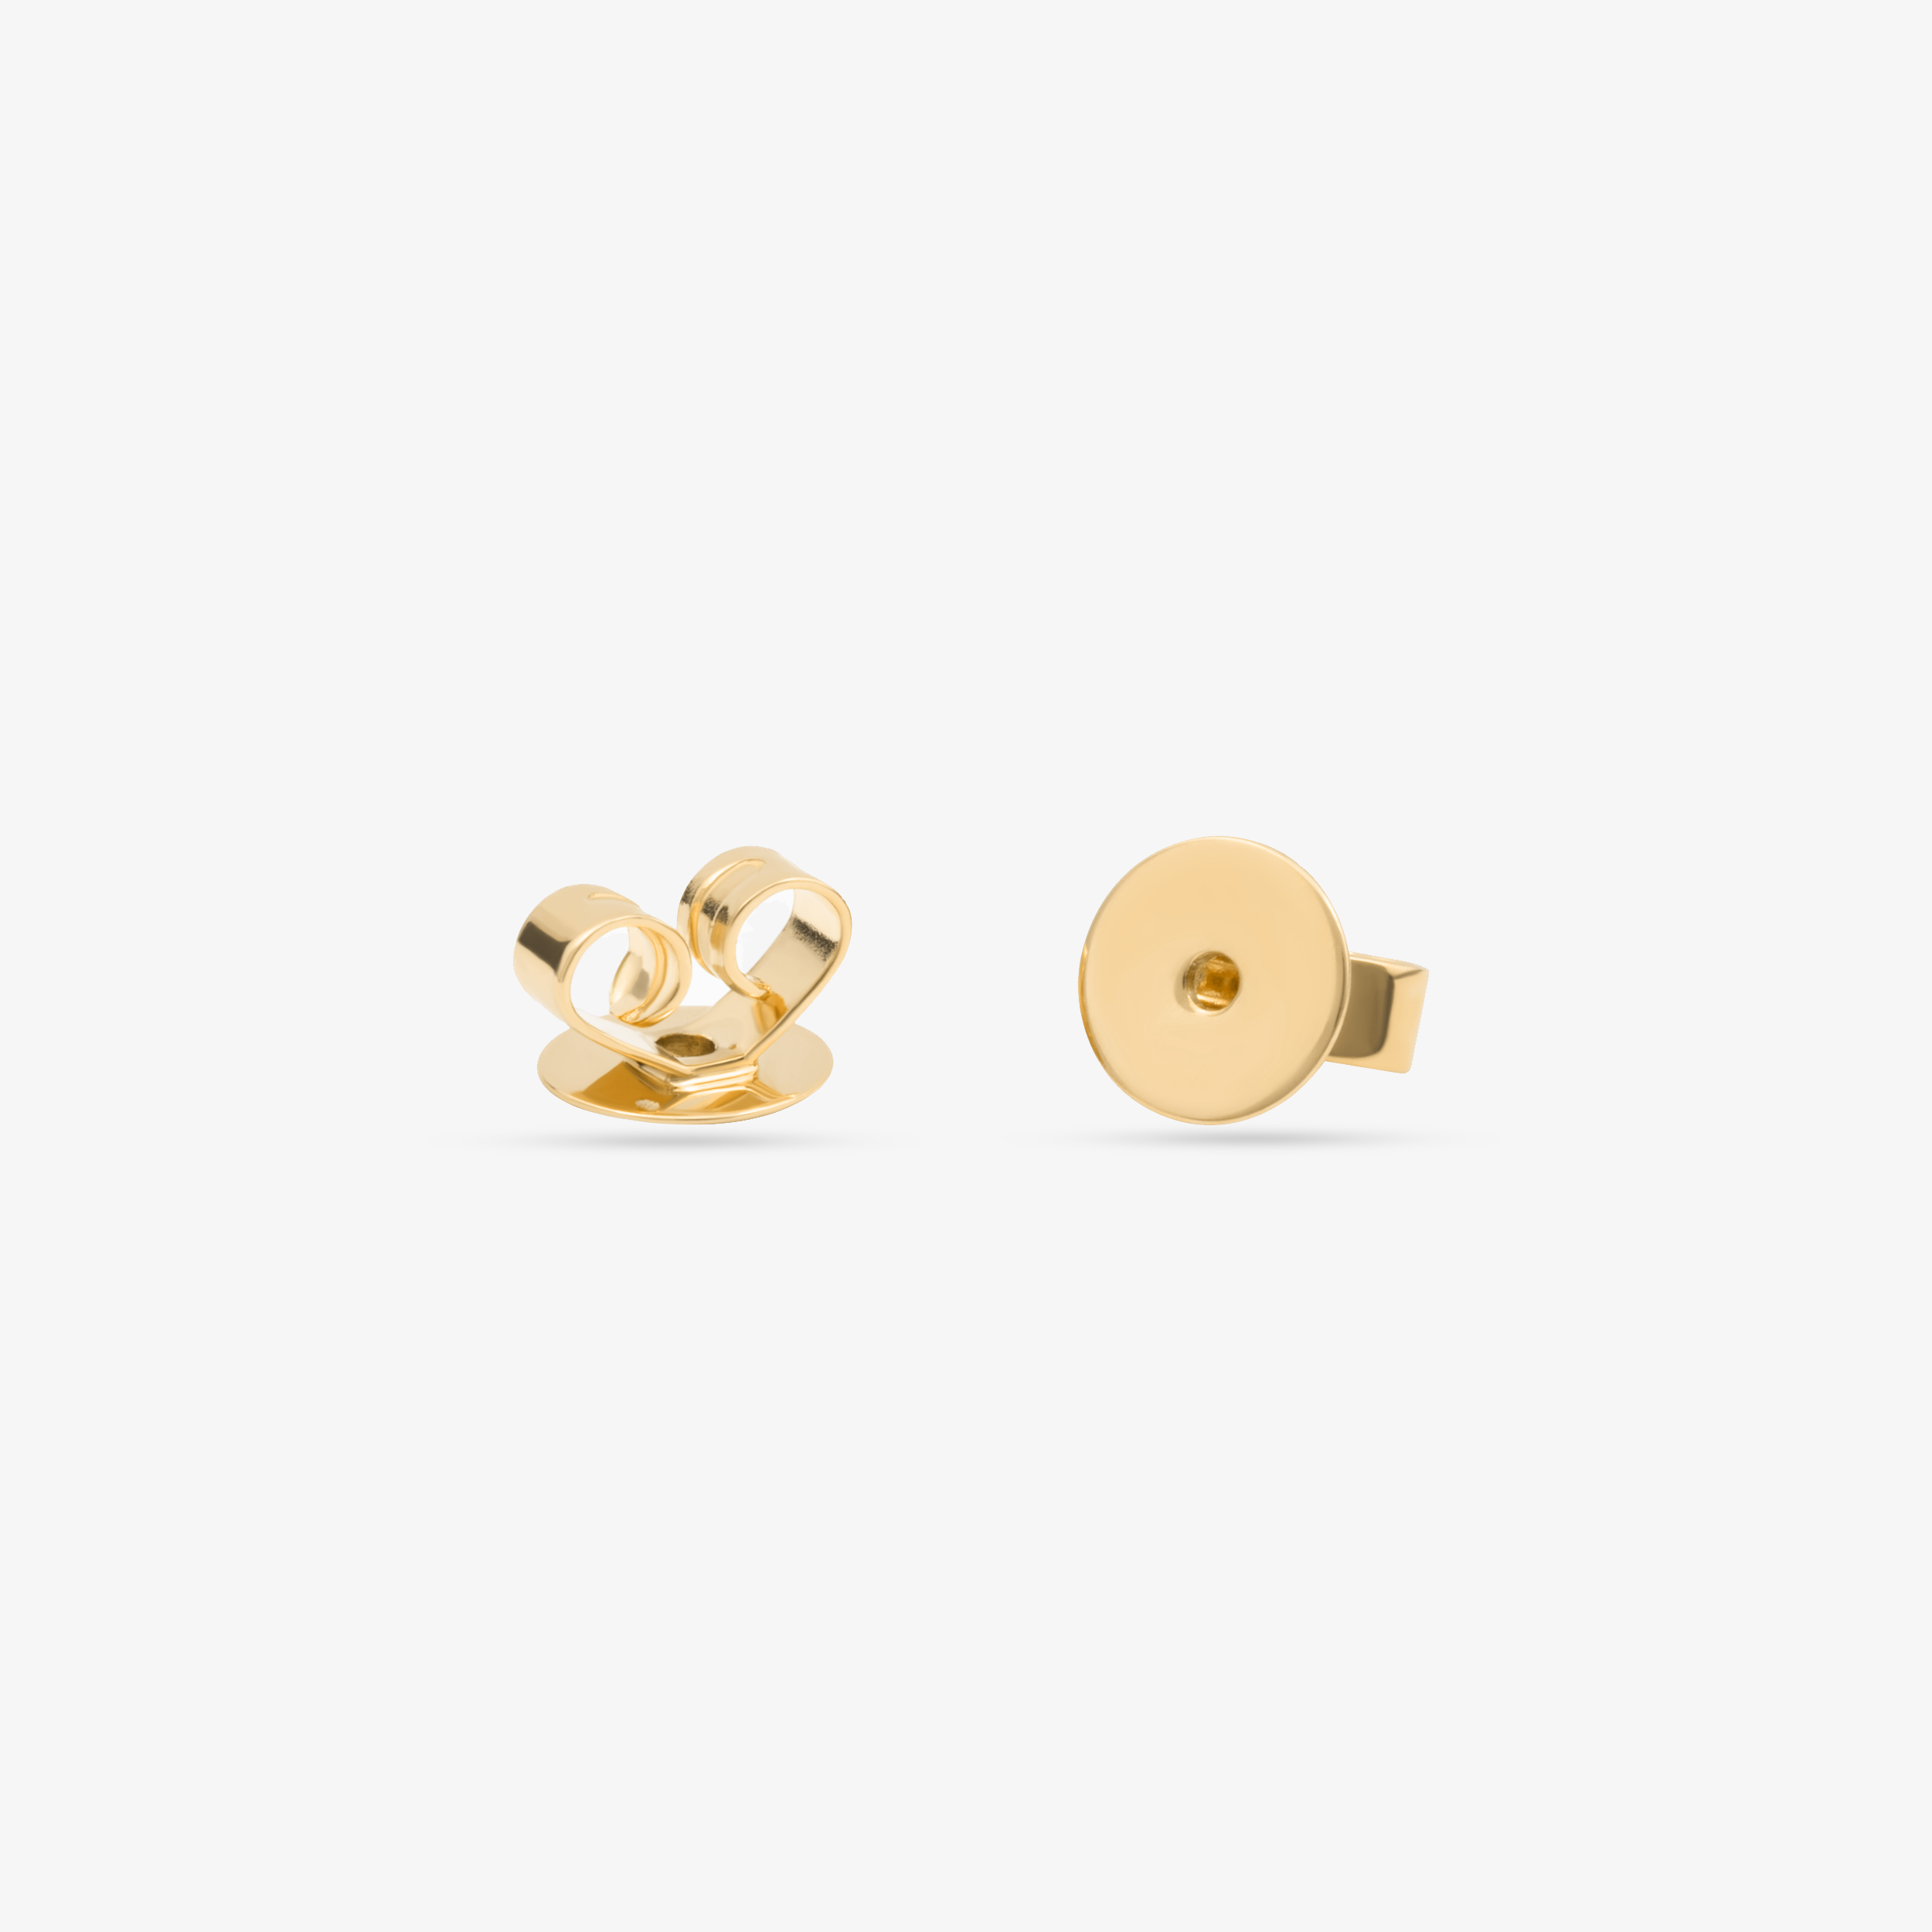 Flower Earrings In 18K Solid Yellow Gold With Diamonds